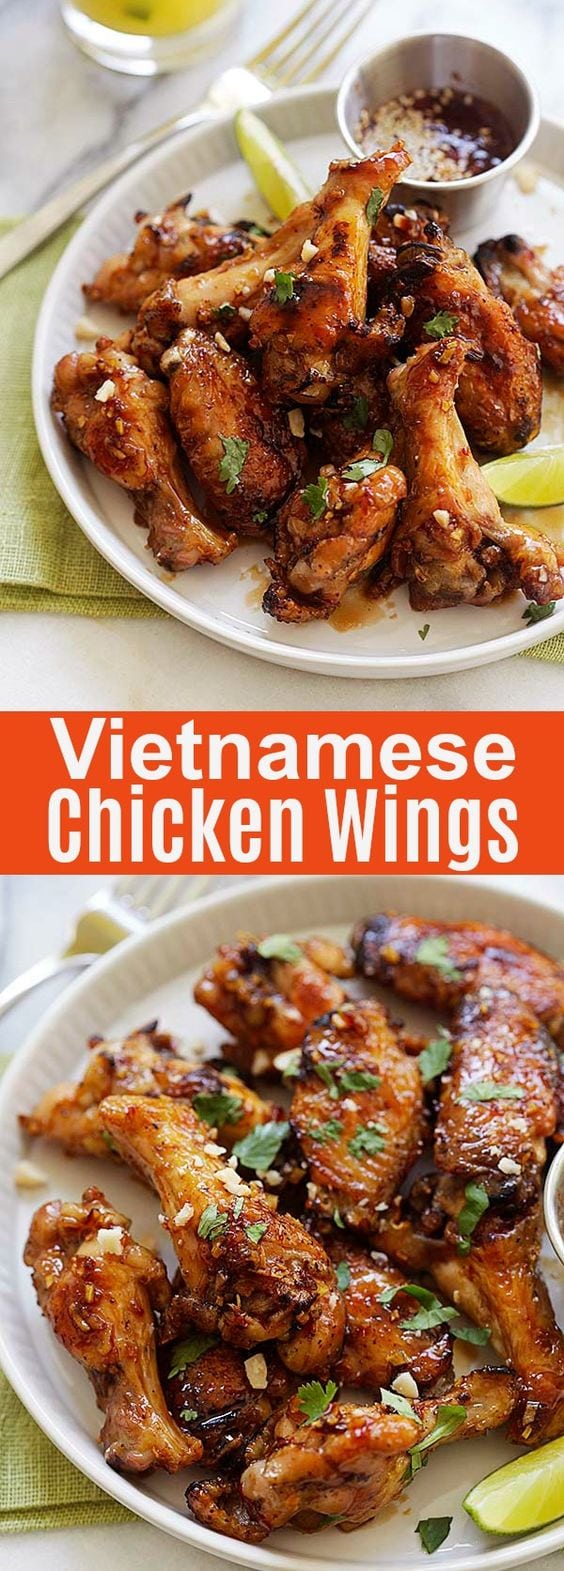 Vietnamese Chicken Wings - Sticky sweet and savory chicken wings marinated with fish sauce, garlic and sugar. Vietnamese chicken wings are absolutely delicious and addictive!